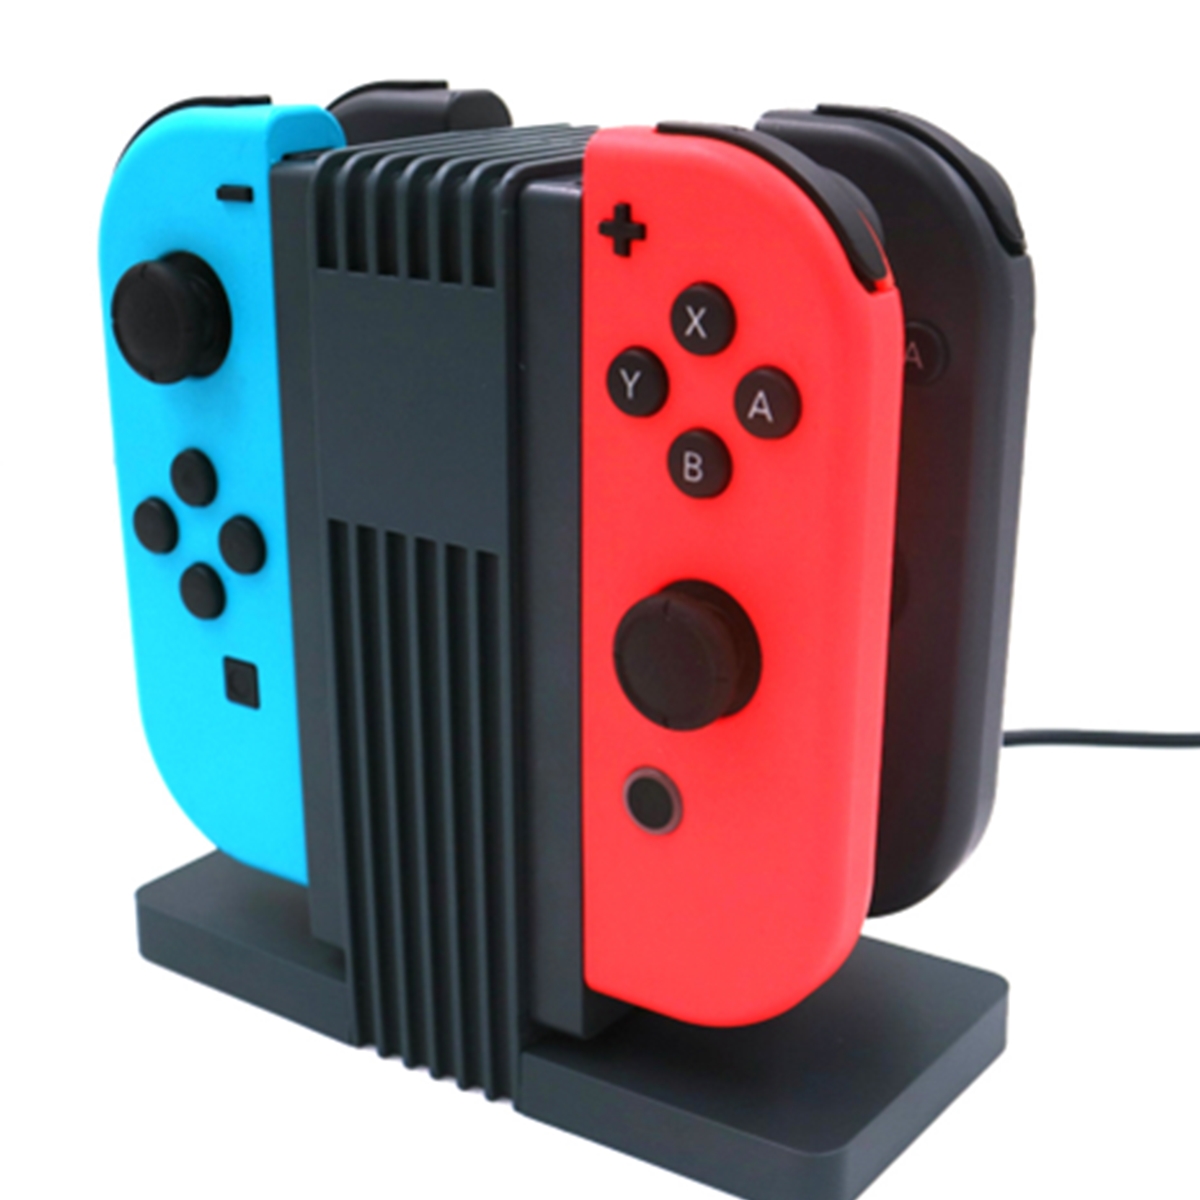 

4 Slot Charging Cradle Stand Dock Station Holder Indicator For Nintend Switch Joy-Con Control